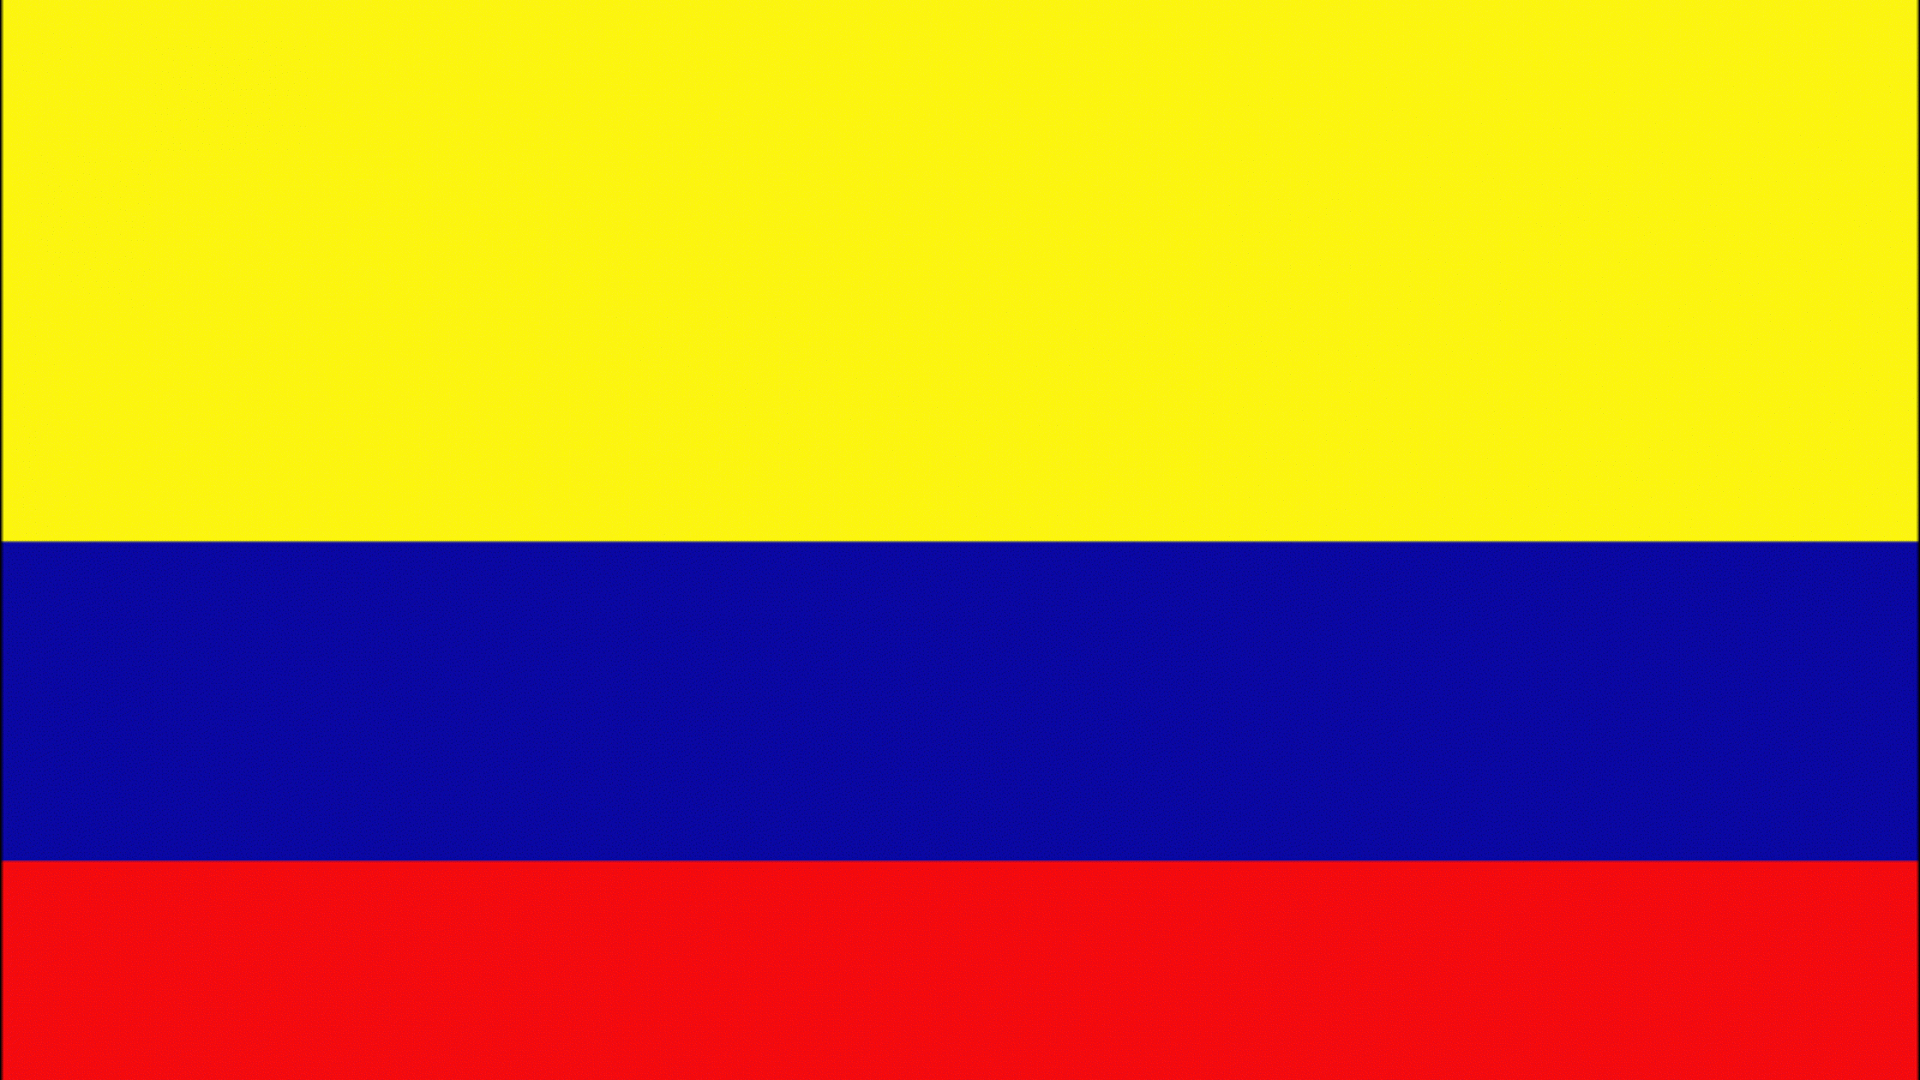 Colombia's flag